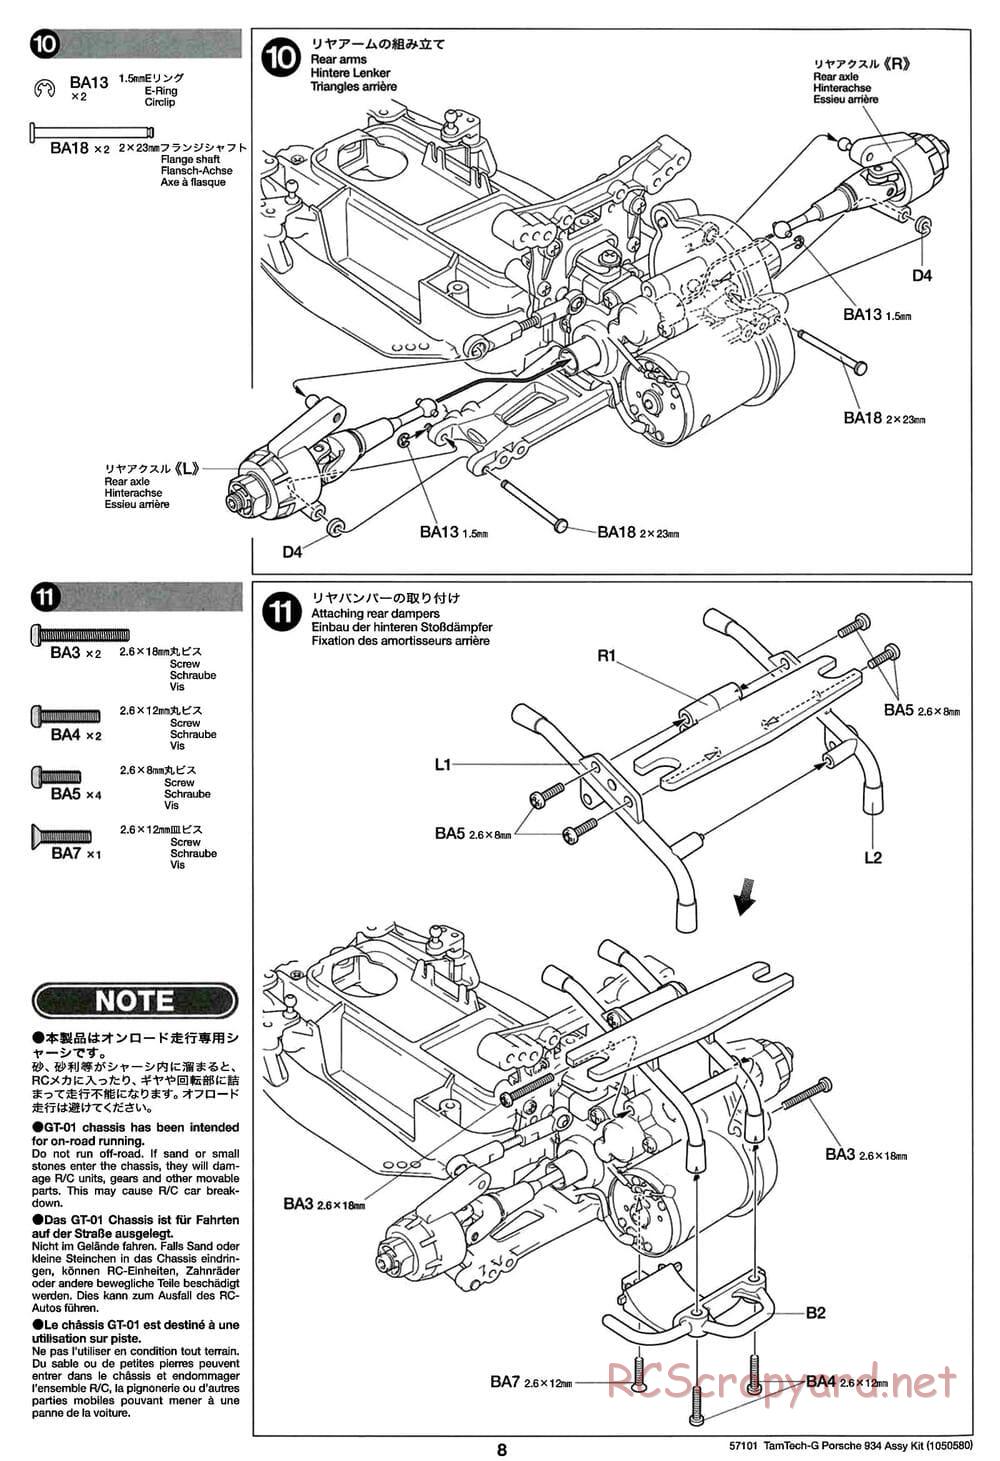 Tamiya - Porsche Turbo RSR - GT-01 Chassis - Manual - Page 8